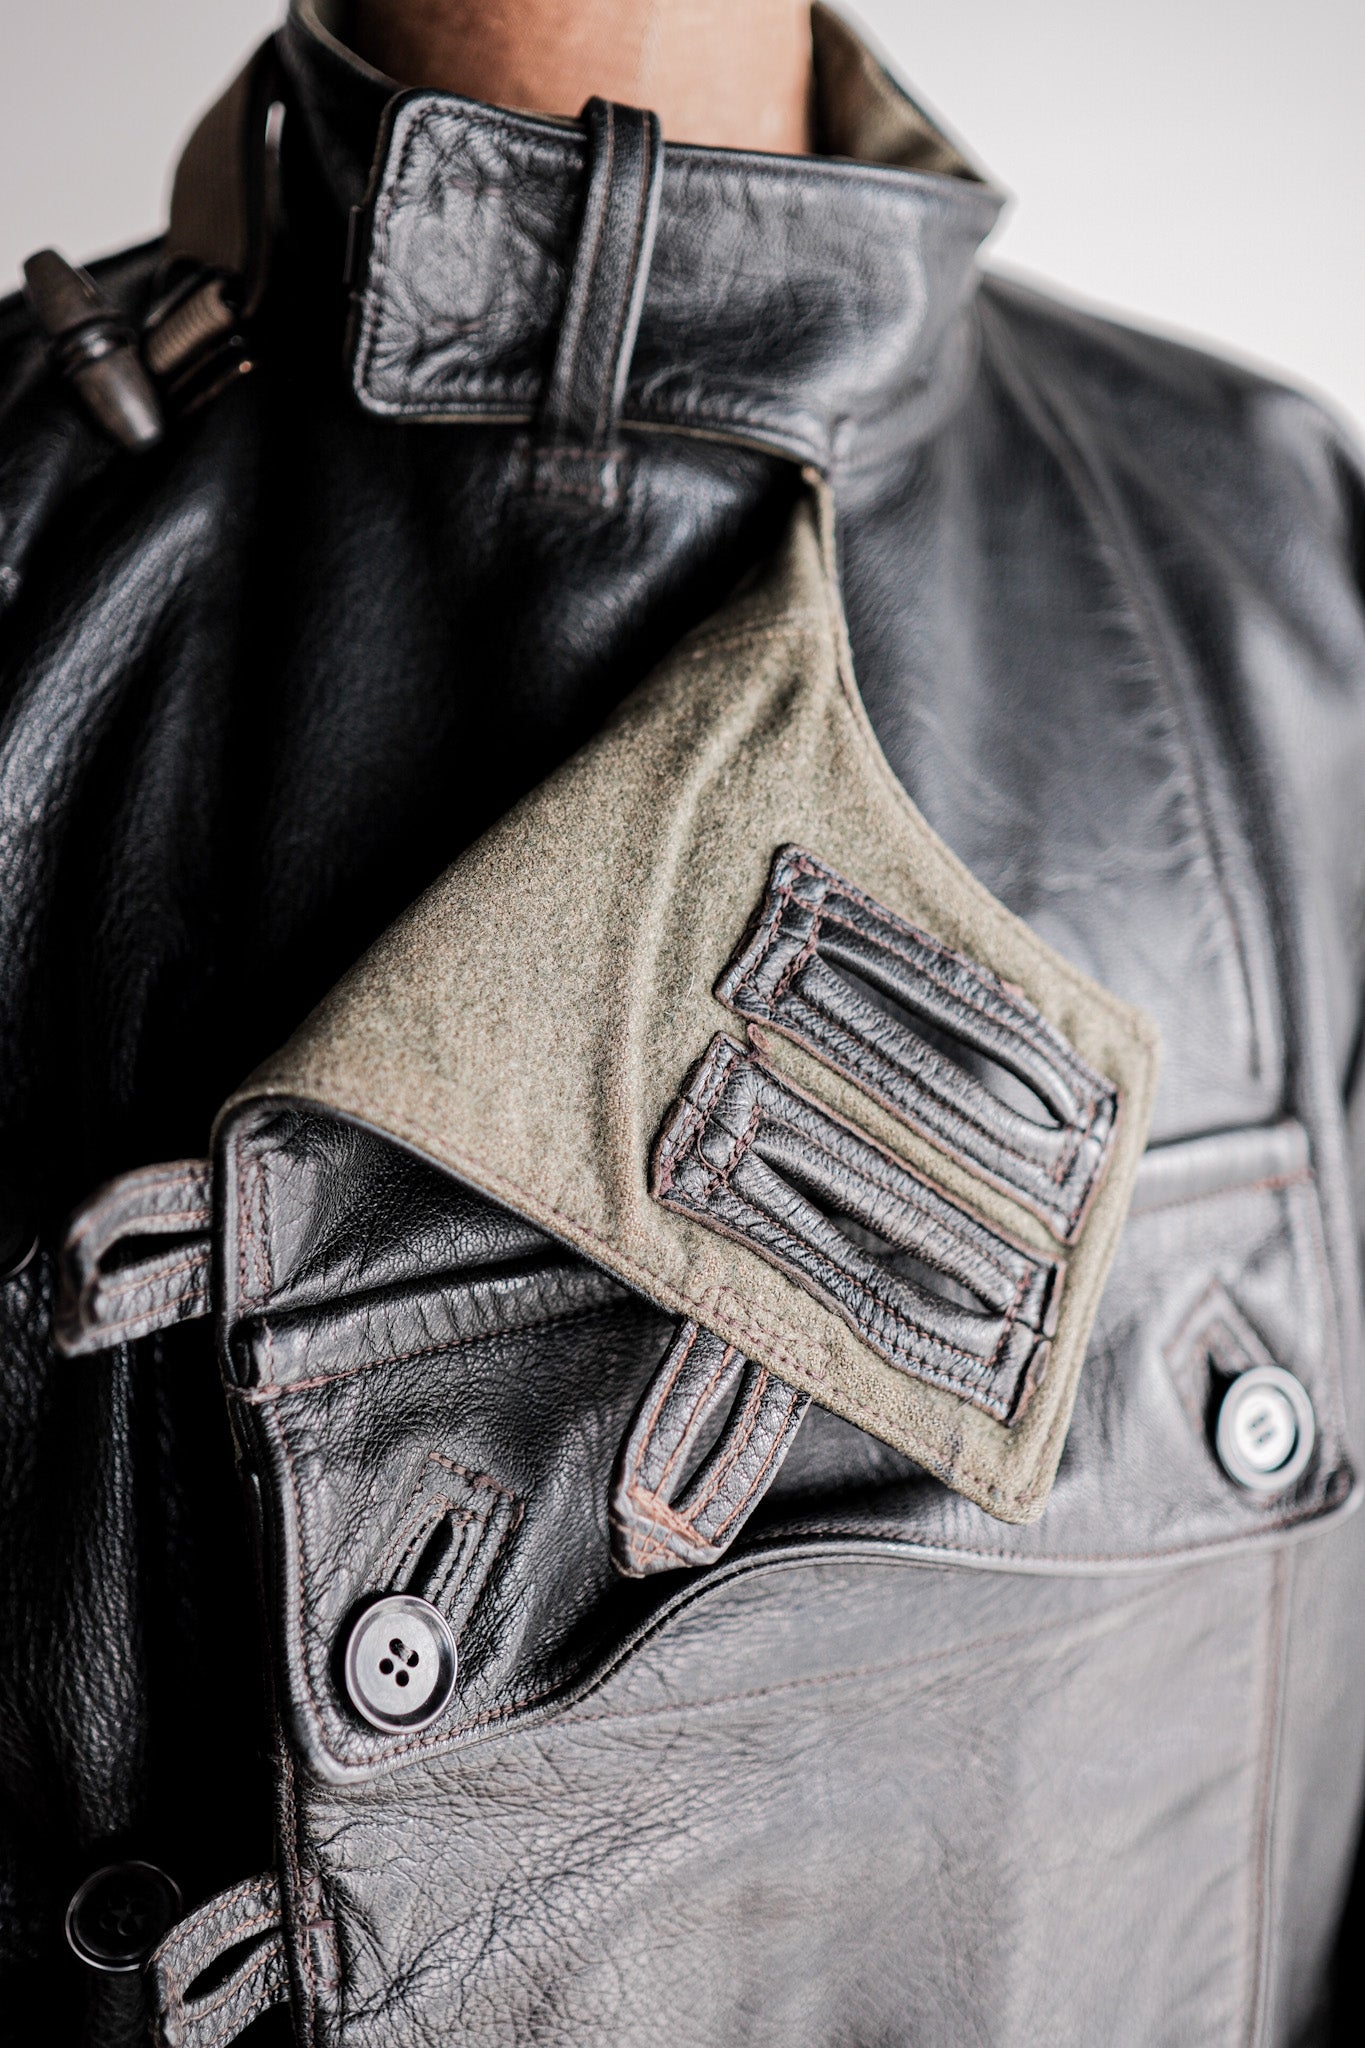 [~ 50's] Swedish Army Dispatch Rider Leather Motorcycle Jacket